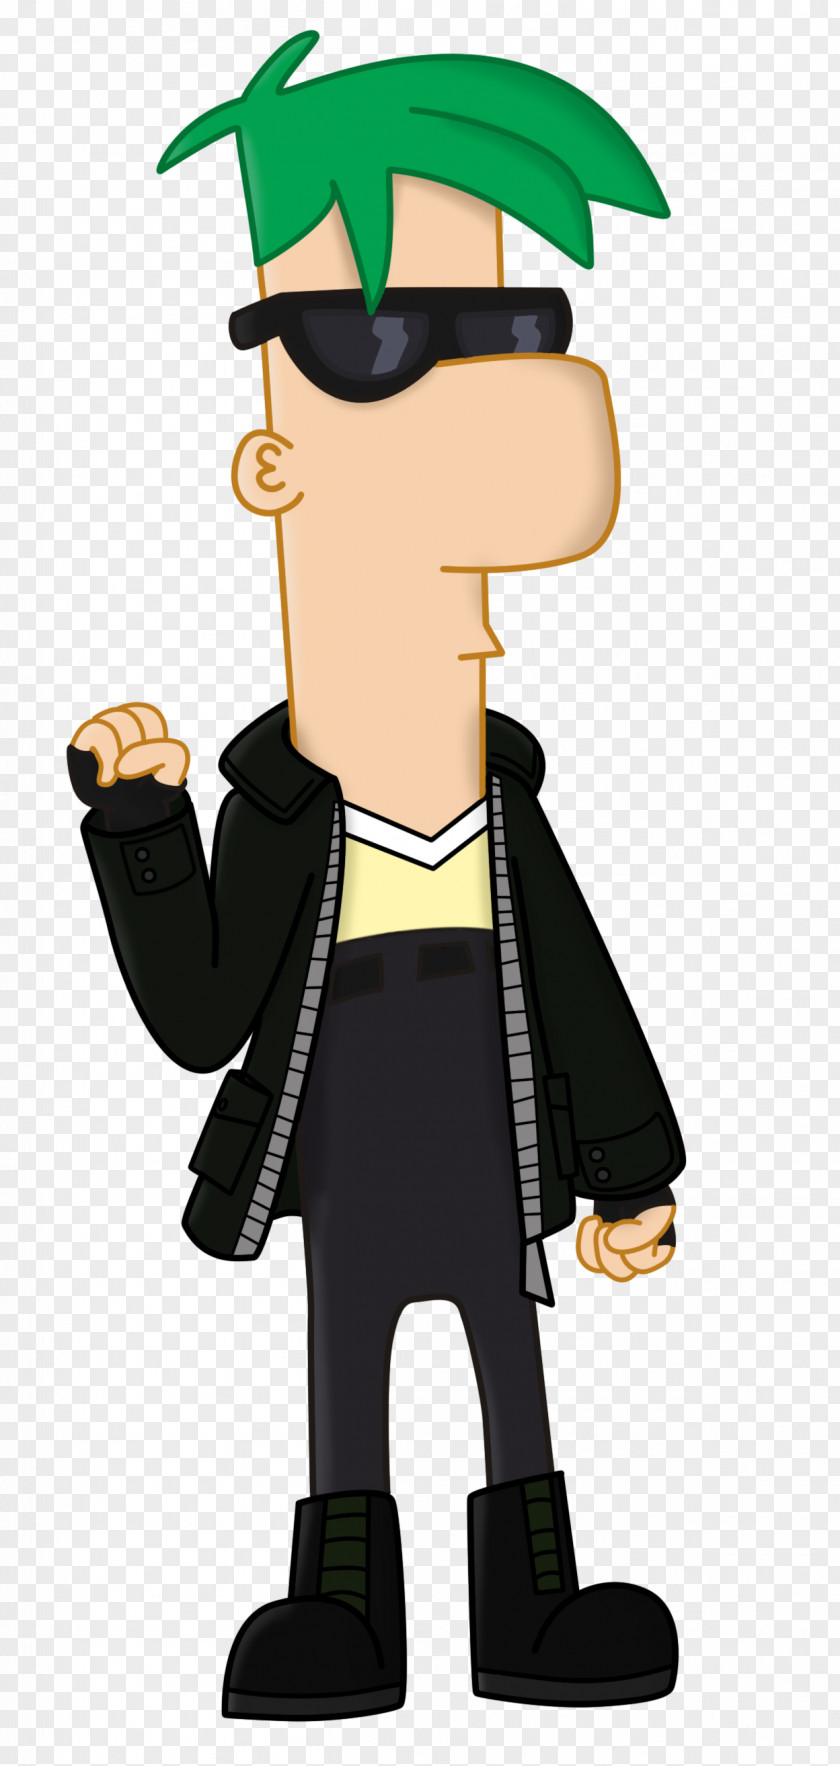 Mysterious Cliparts Ferb Fletcher Phineas Flynn Candace Clip Art PNG